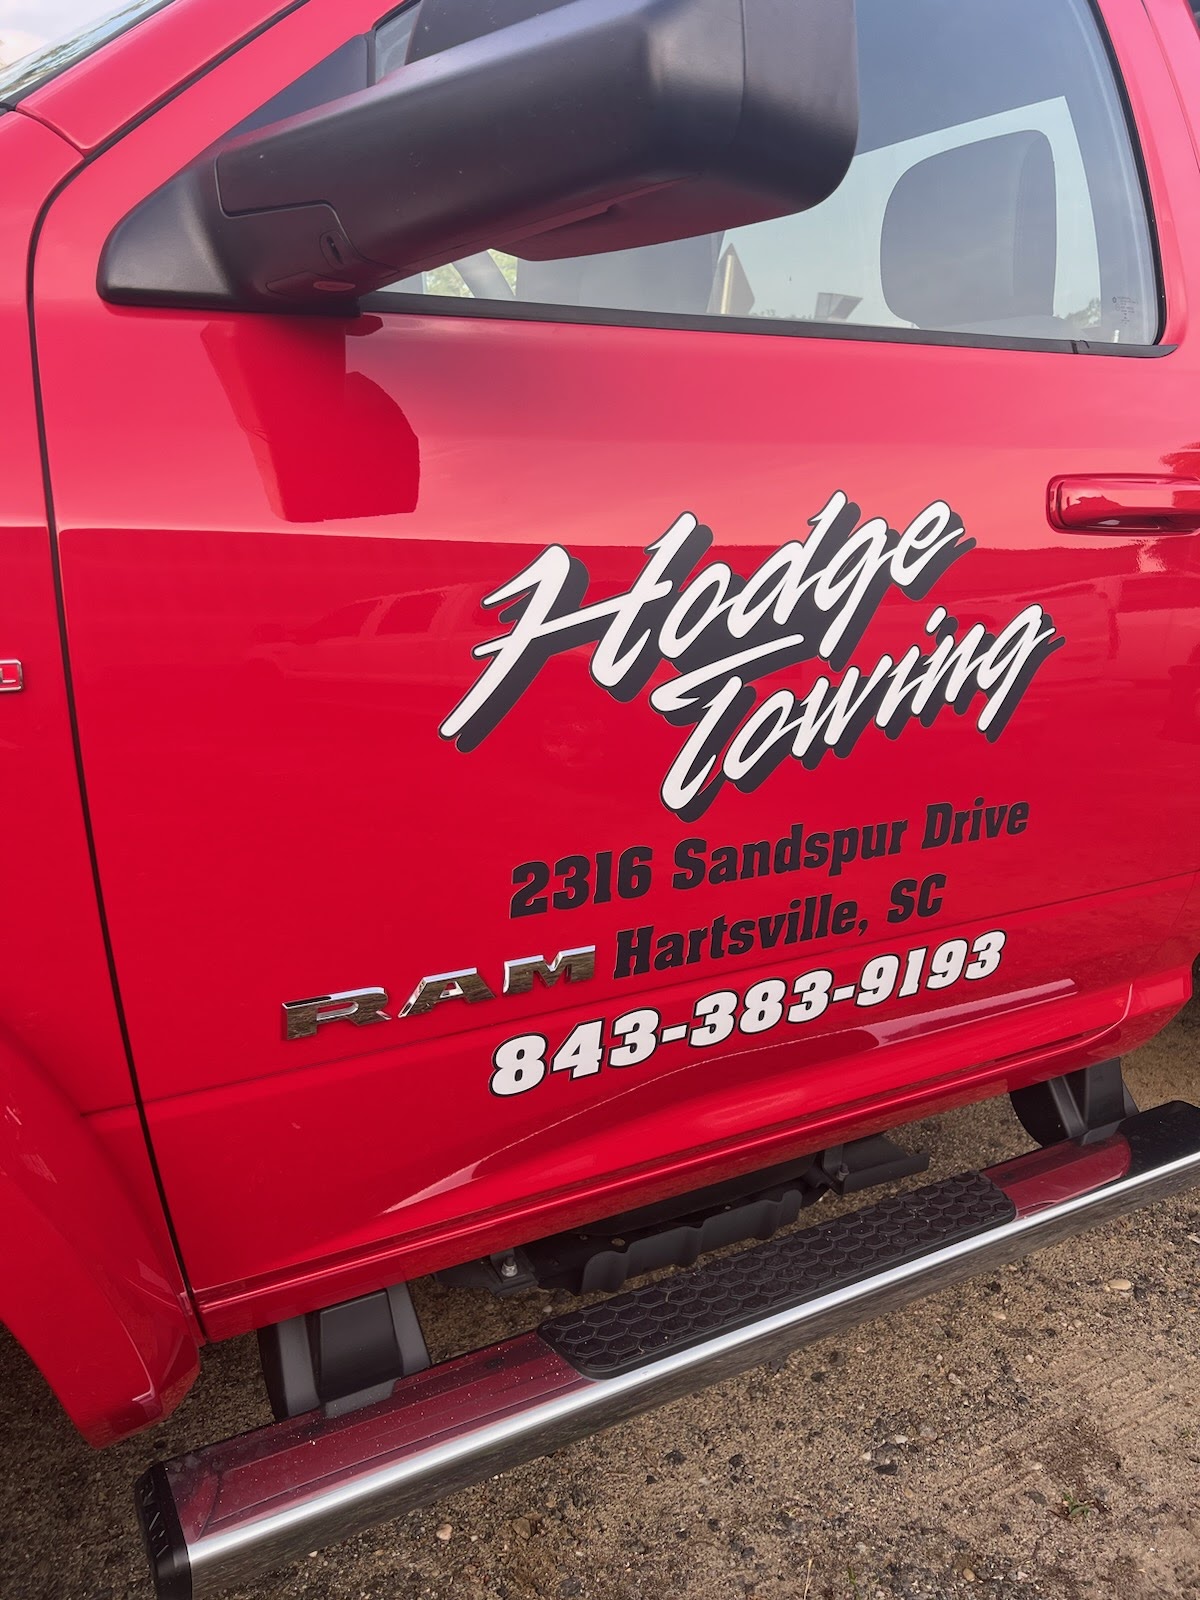 Hodge Towing